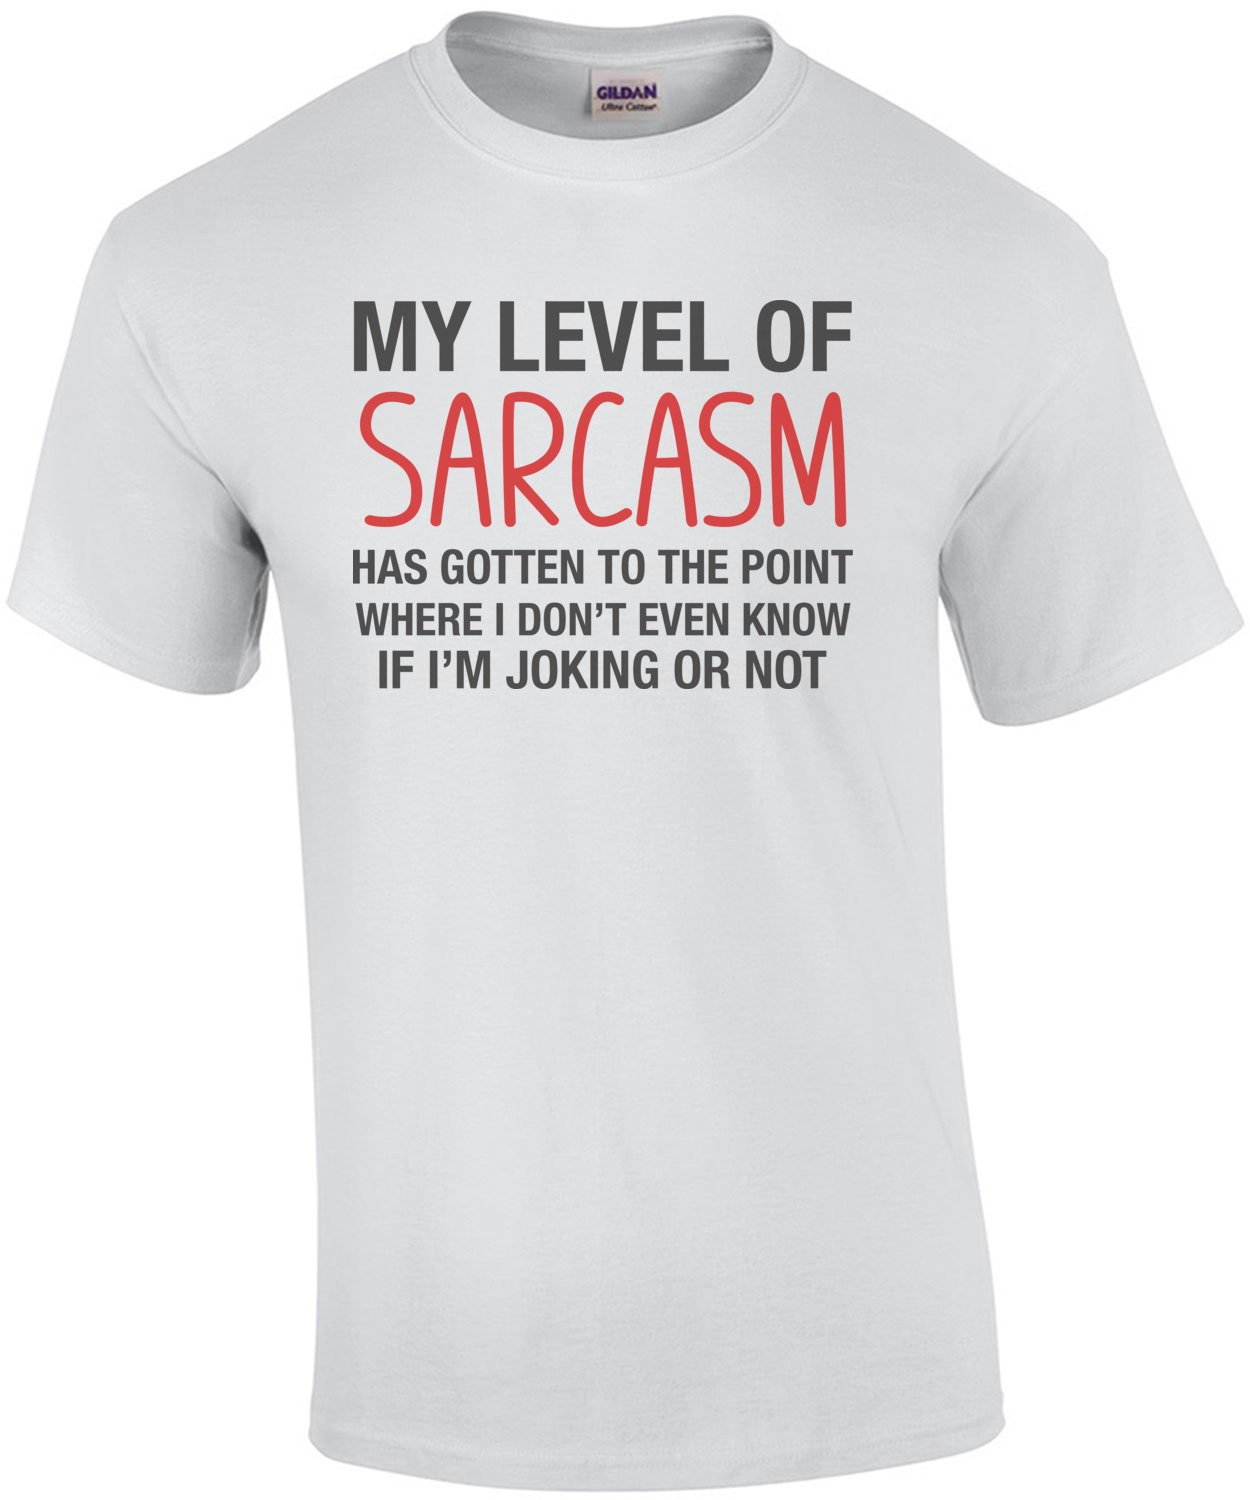 My Level Of Sarcasm Has Gotten To The Point... Shirt